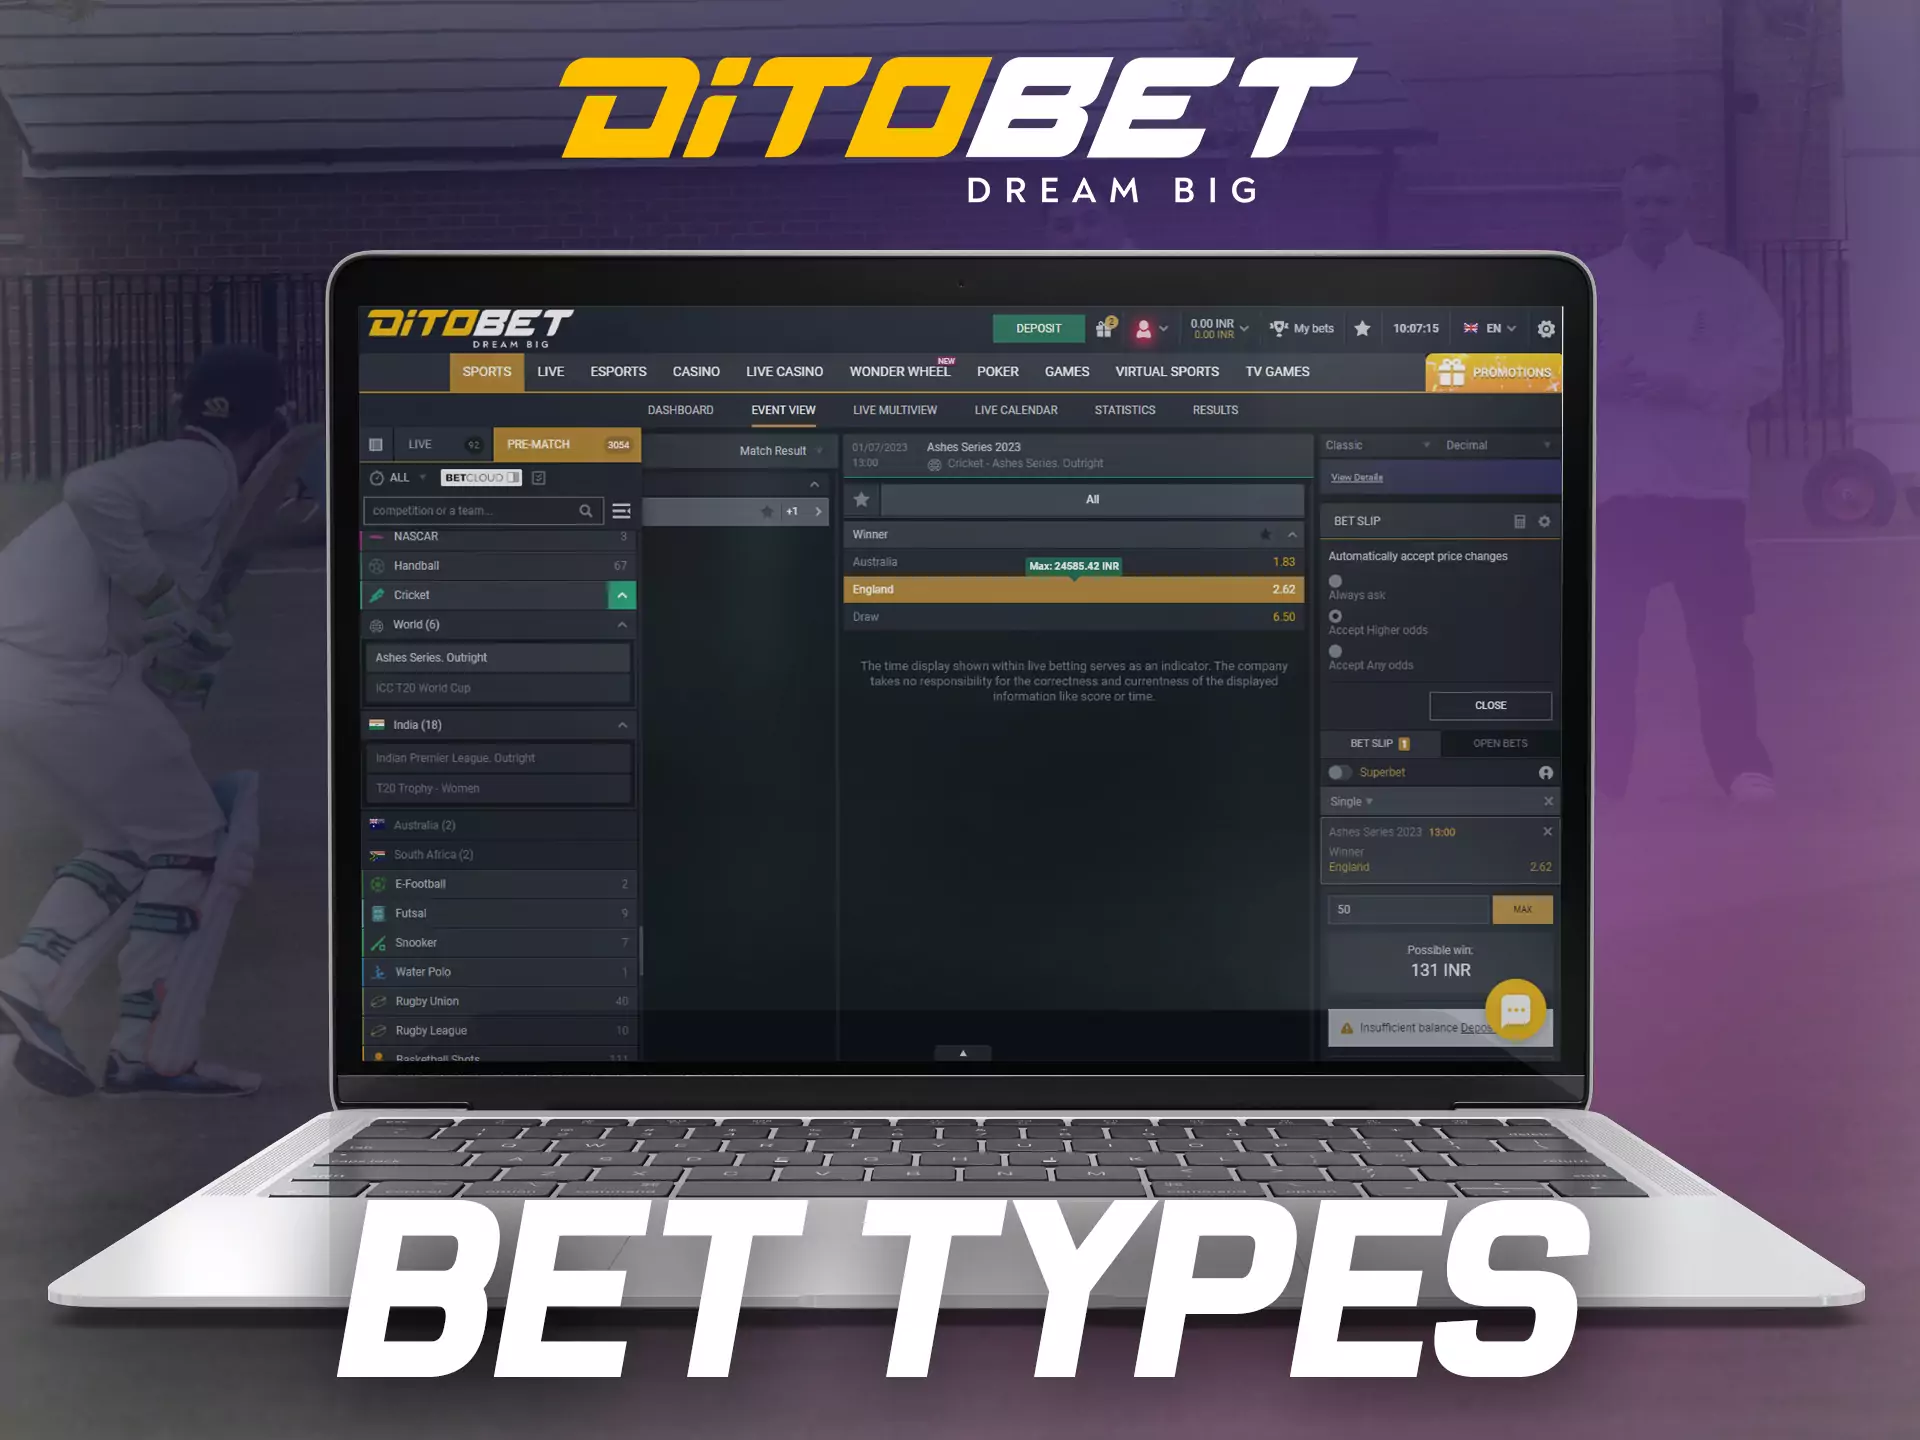 Learn about the different types of bets on Ditobet.